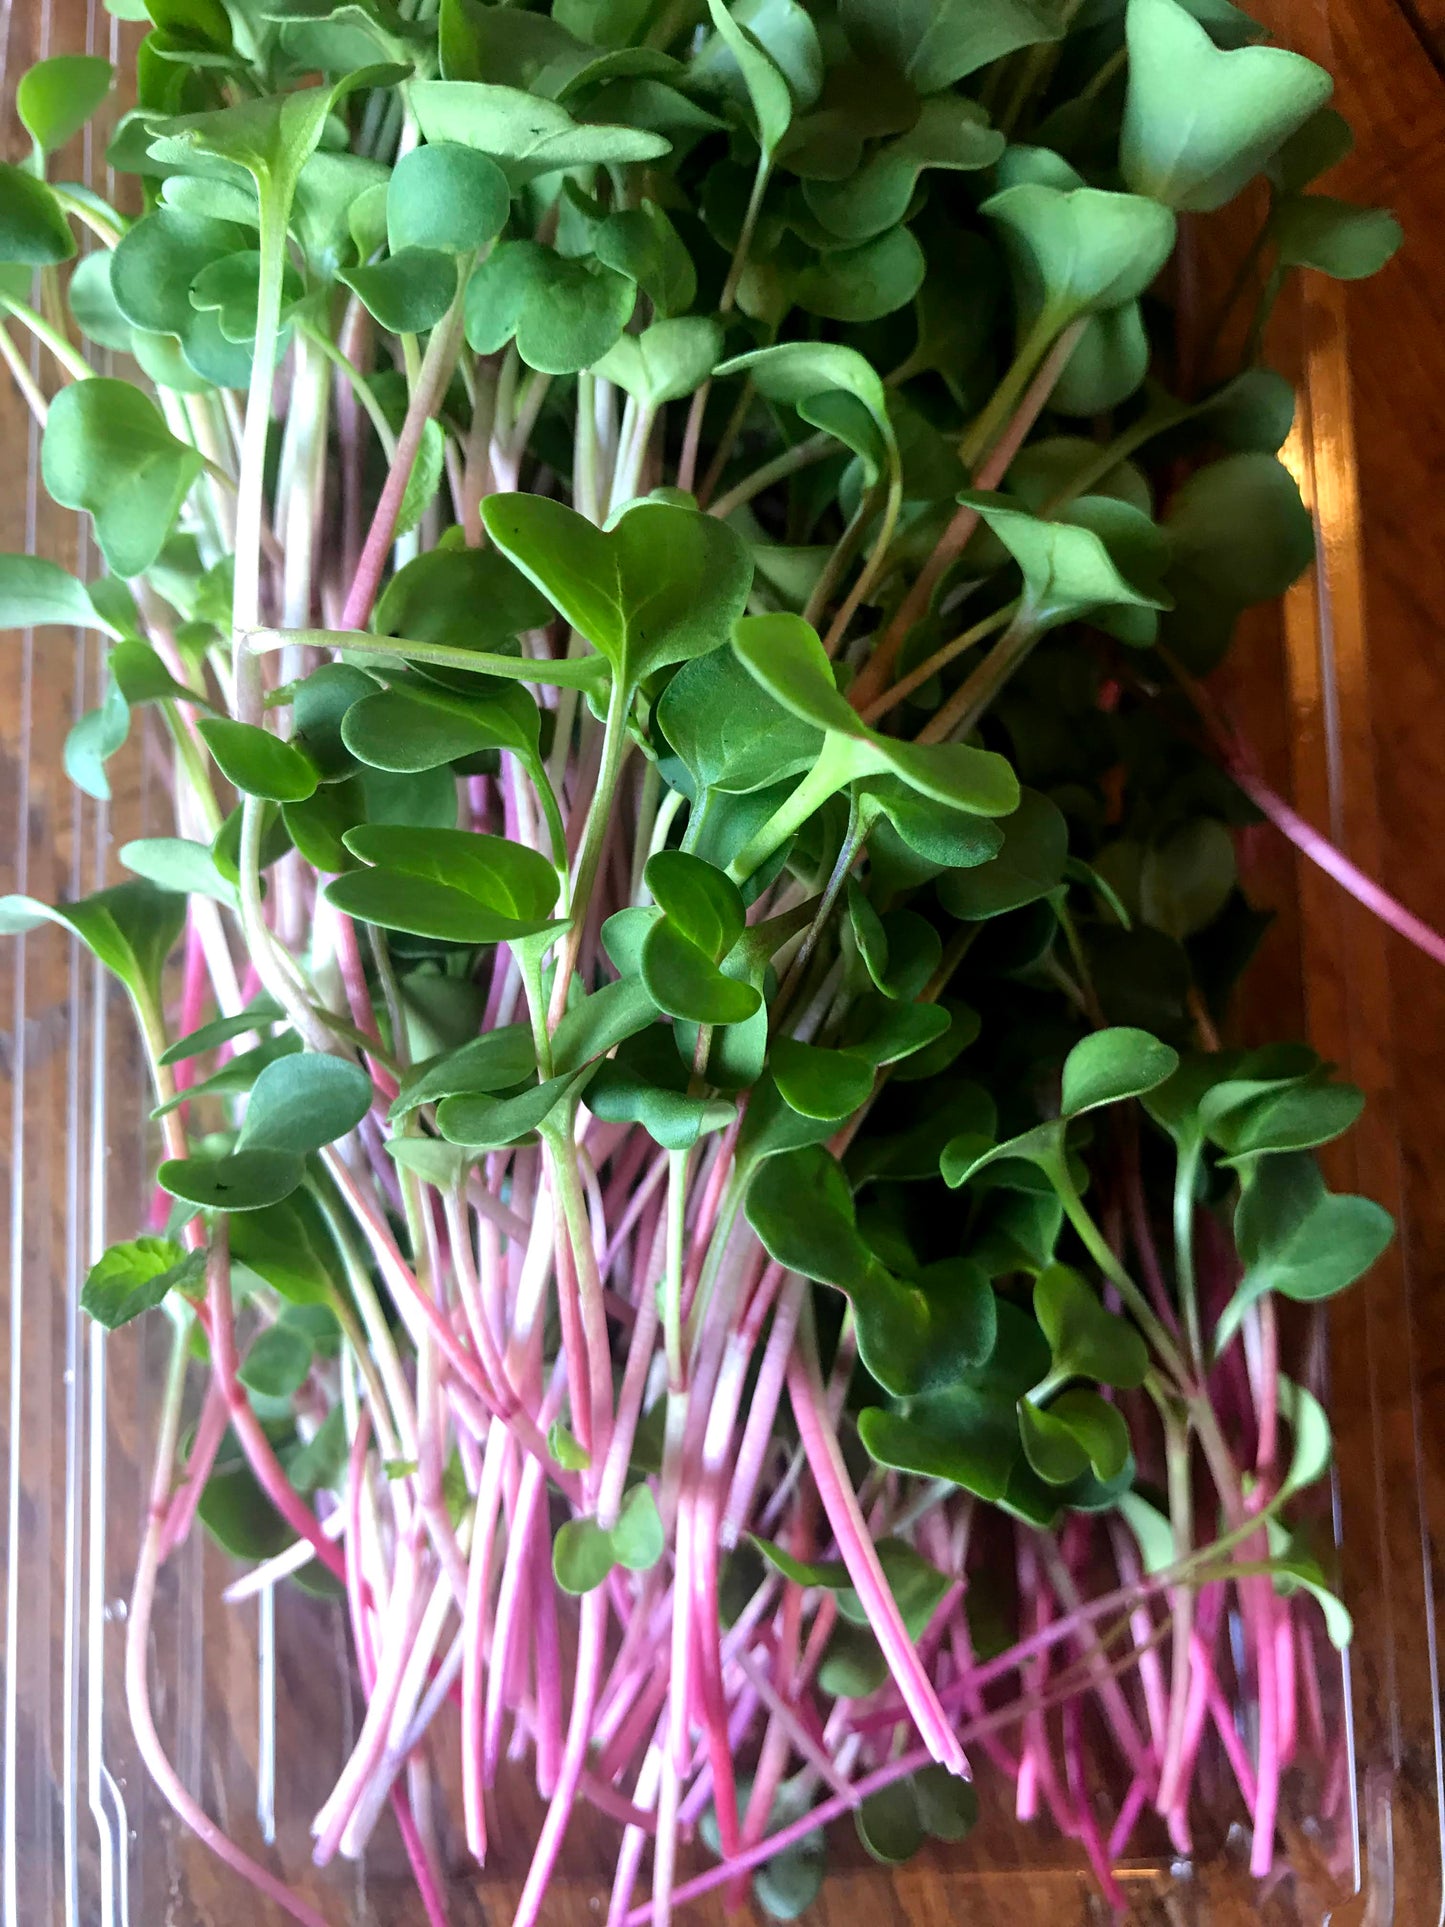 The Microgreens First Timer!